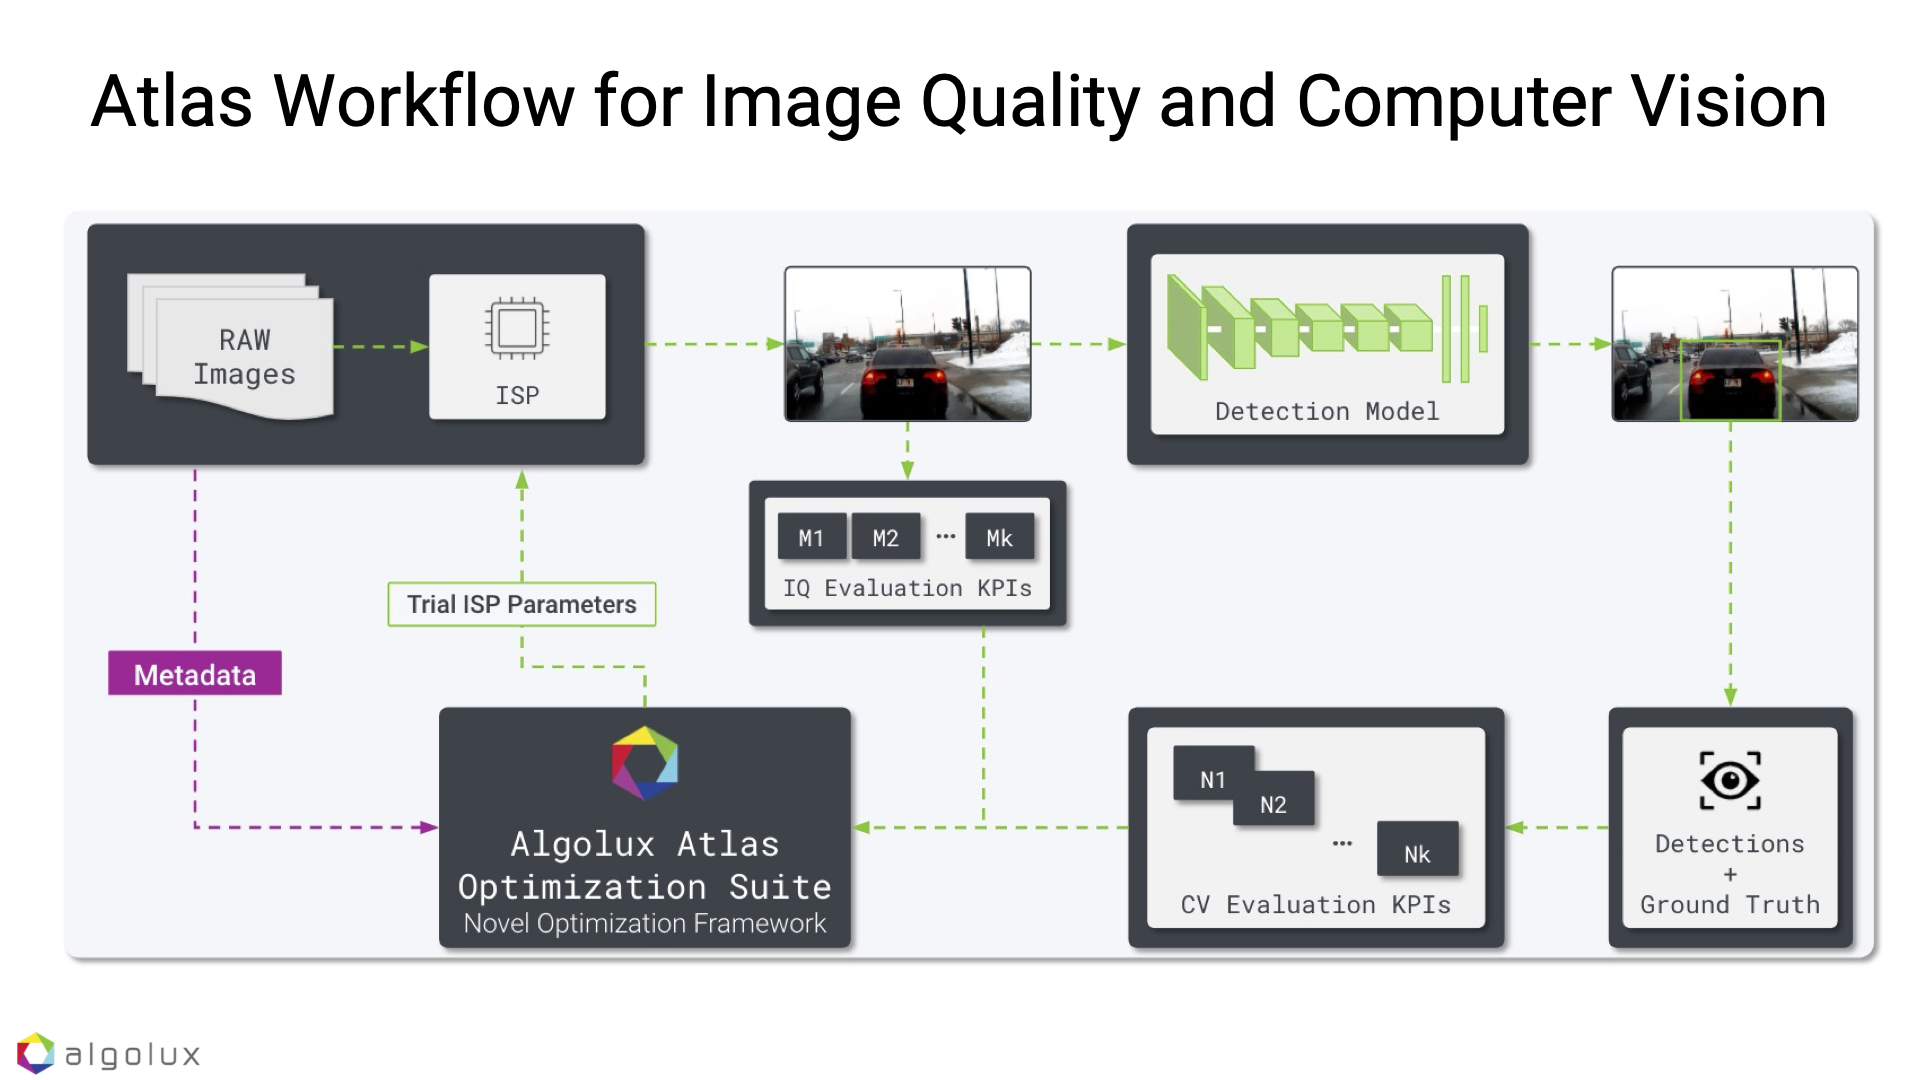 Algolux Atlas Camera Optimization Suite workflow for image quality and computer vision